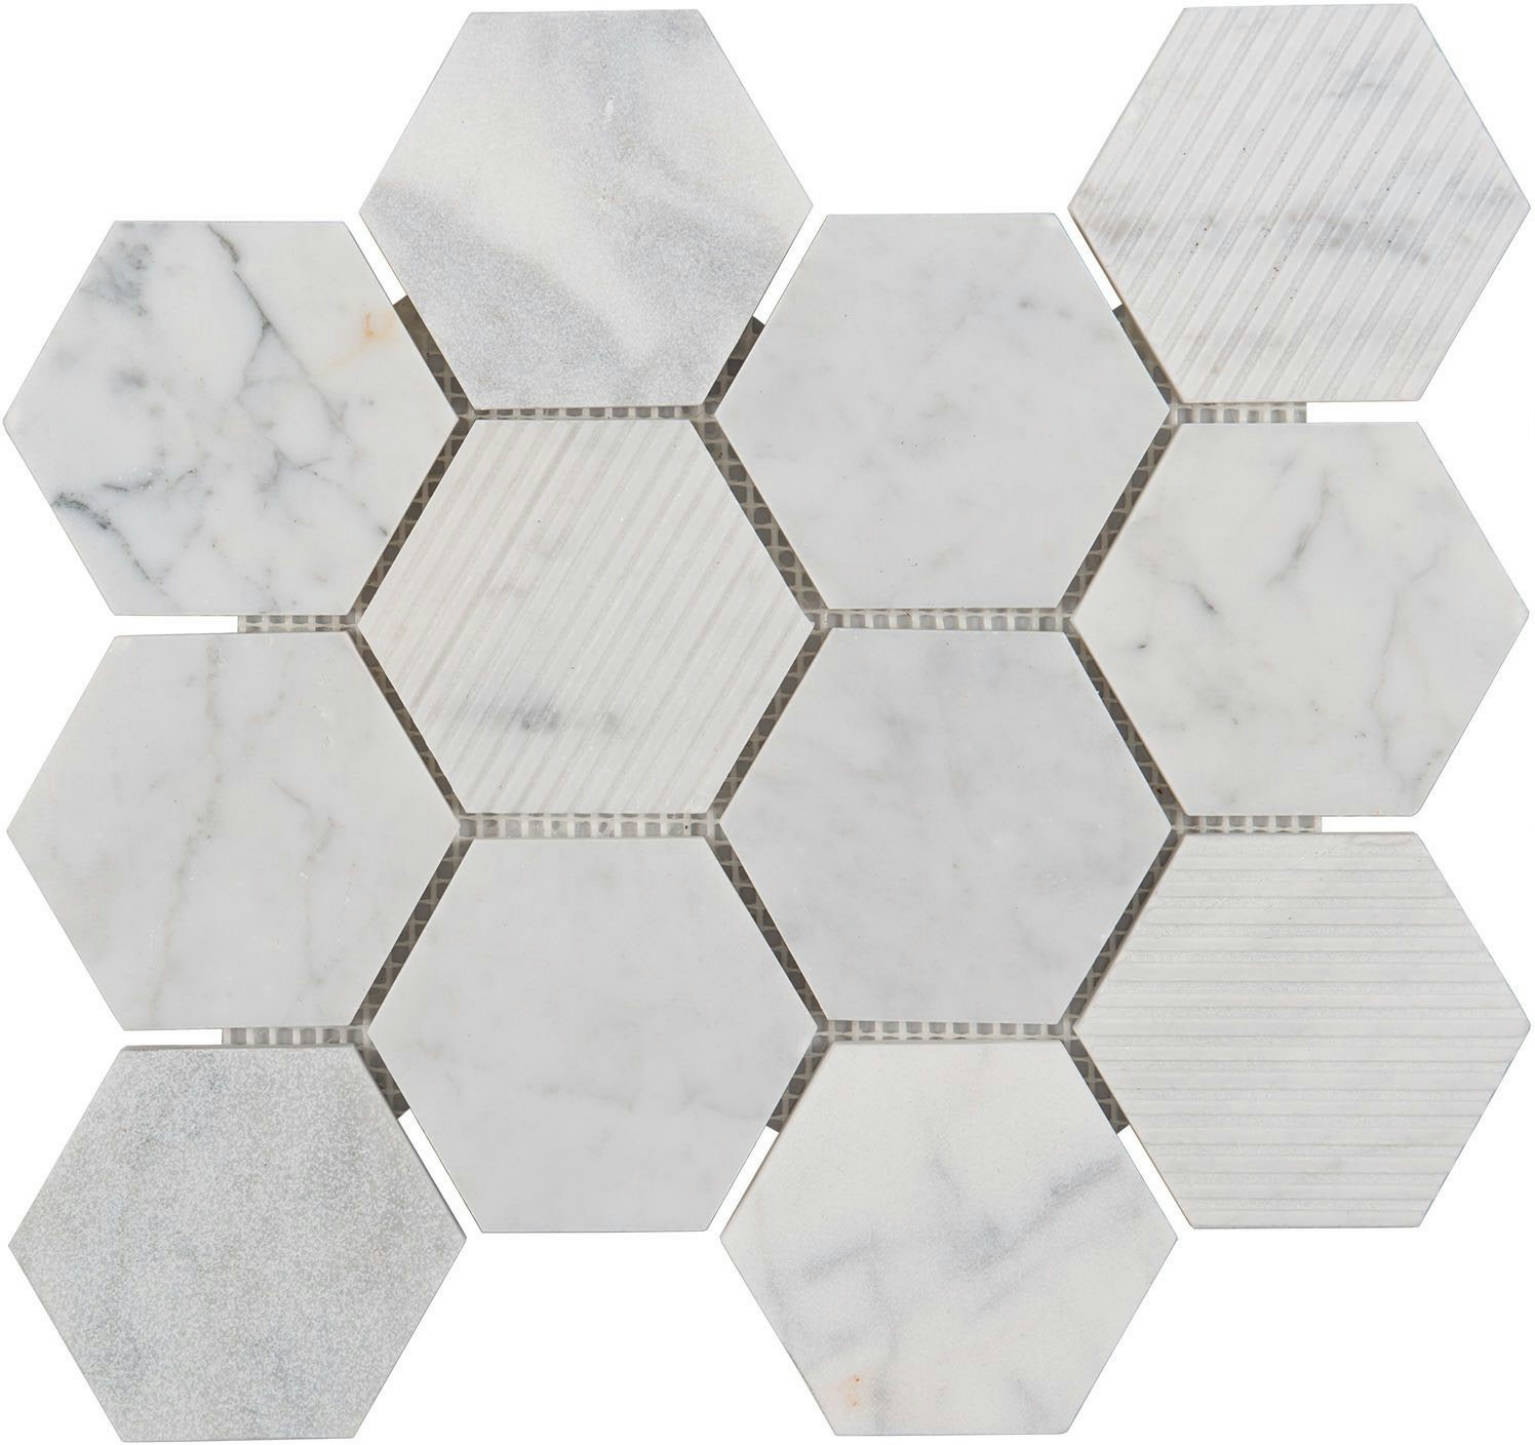 YS1528P | Stones & More | Finest selection of Mosaics, Glass, Tile and Stone